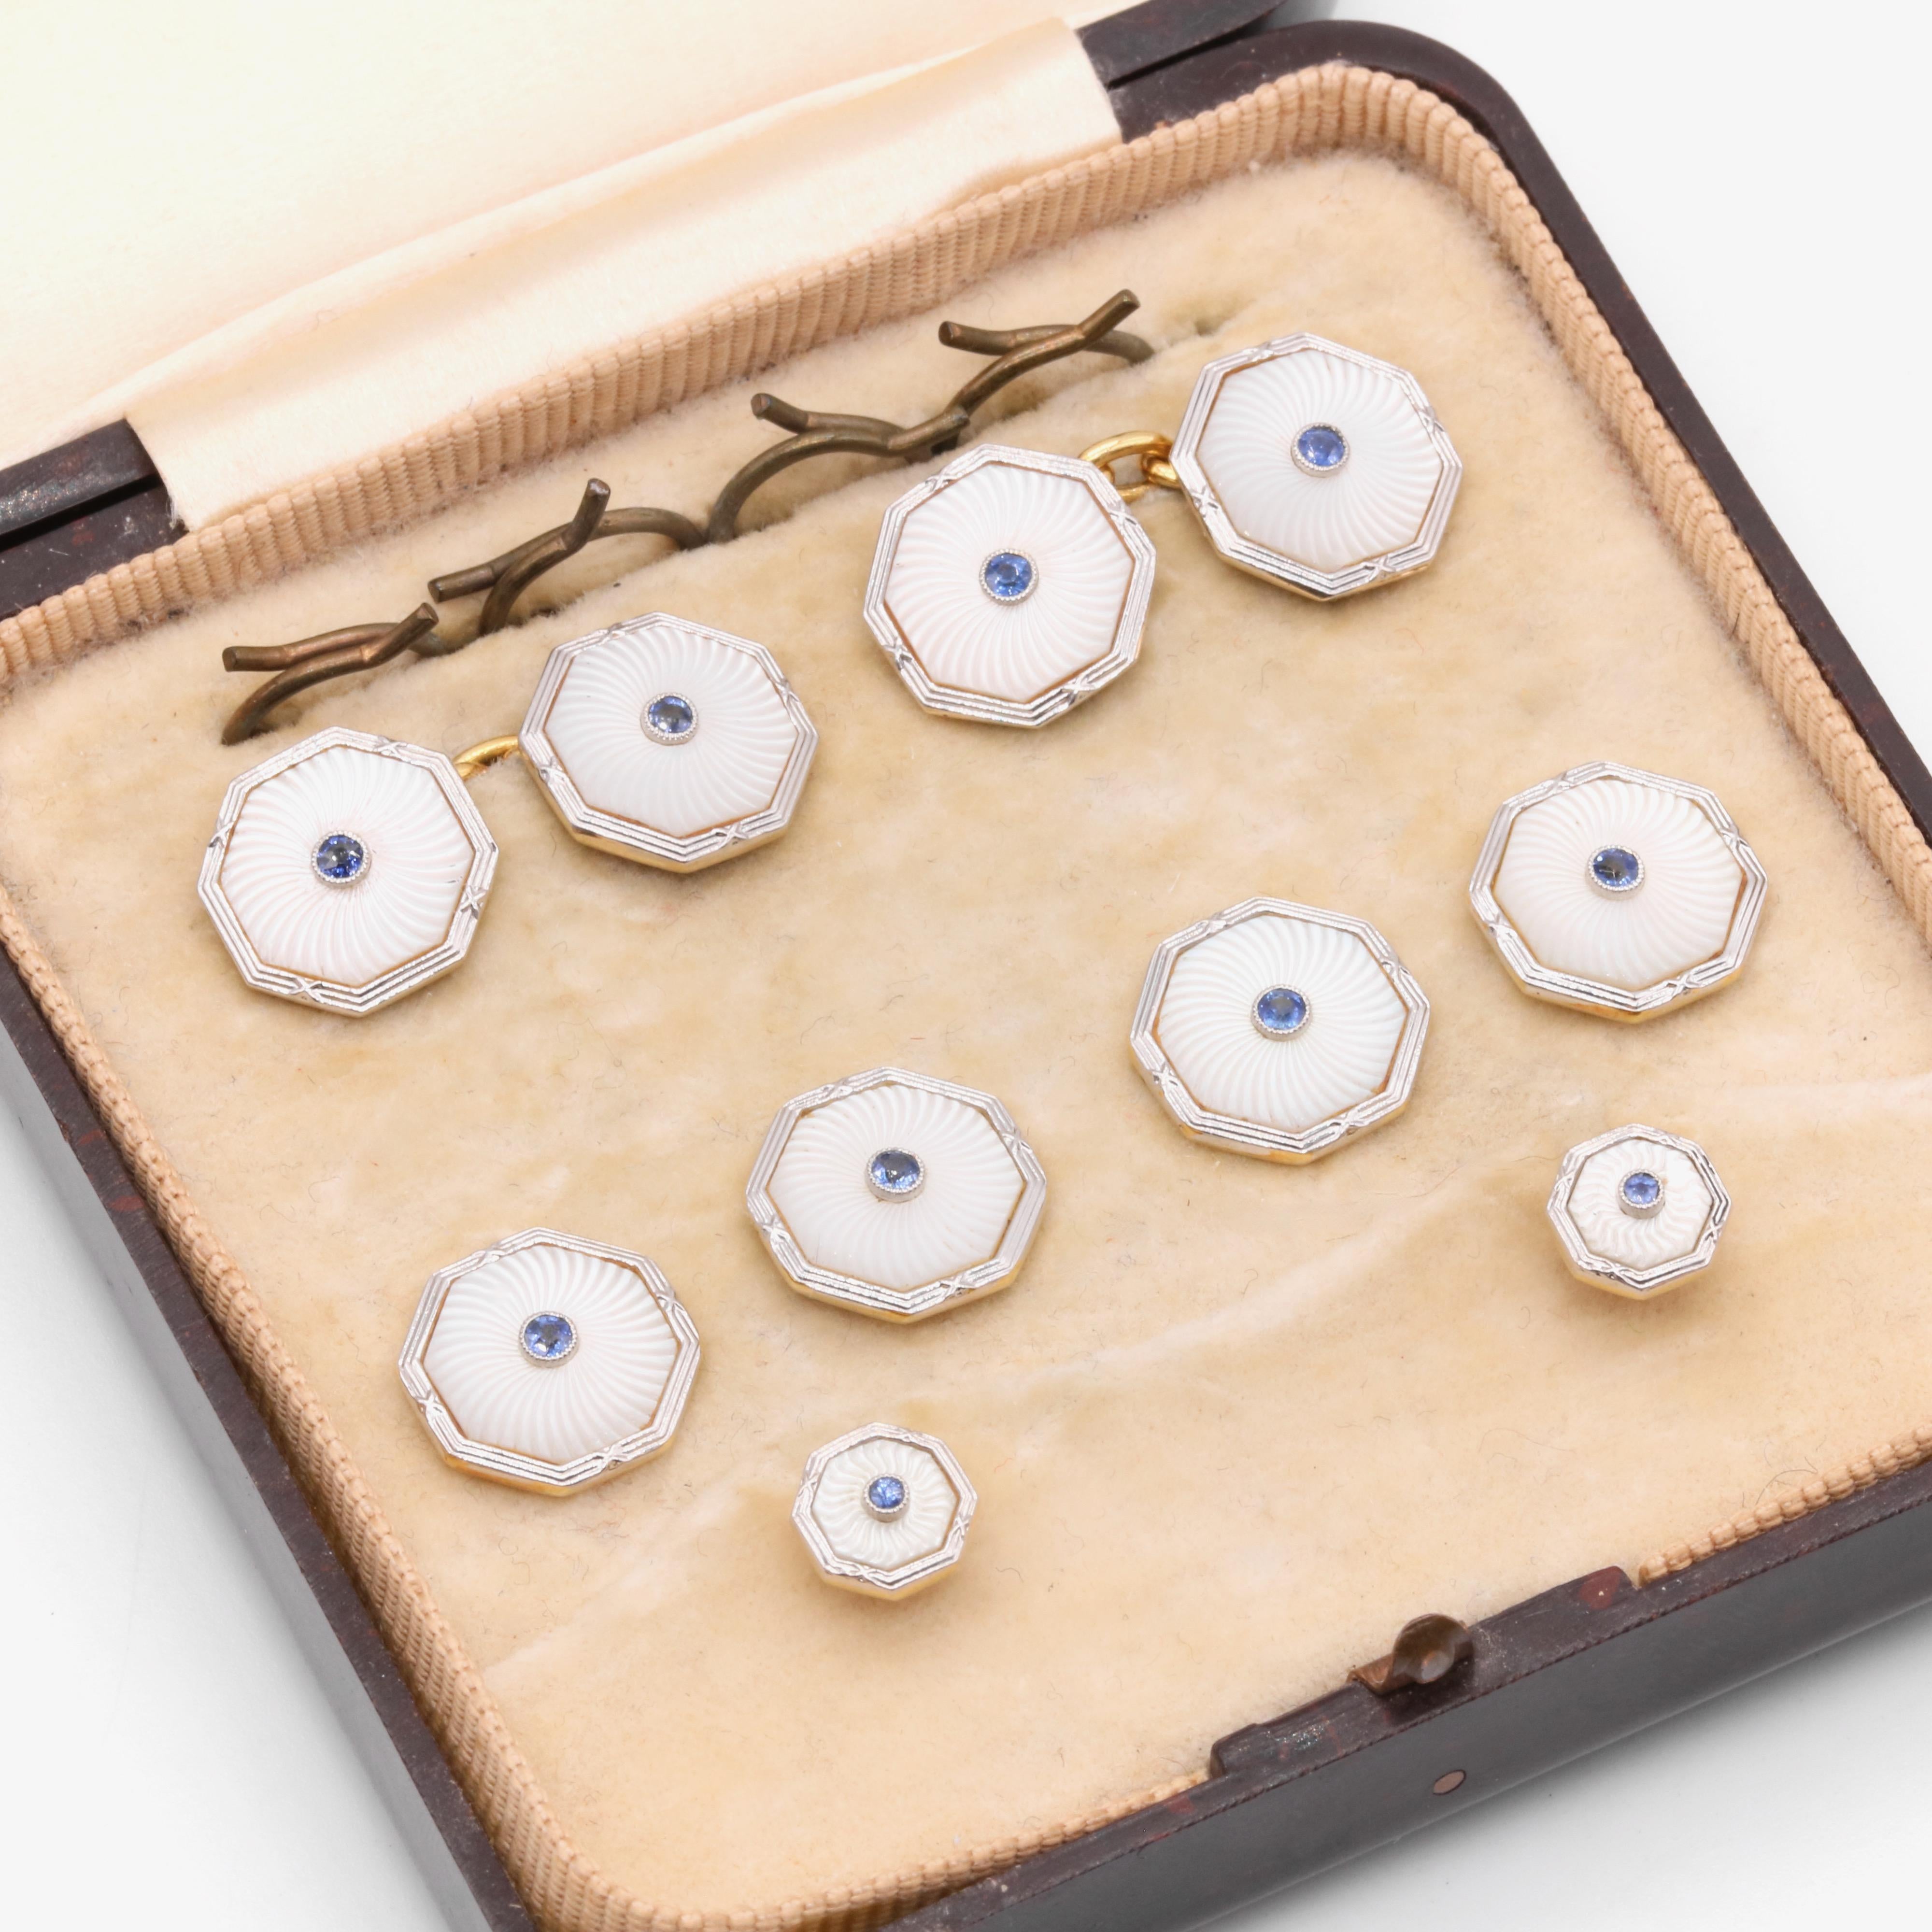 A set of Art Deco sapphire, mother of pearl, platinum, and yellow gold cufflinks and dress buttons, each comprising one round cut blue sapphire, and a carved panel of mother of pearl, platinum, an 18 karat yellow gold. 

This glamorous gentleman’s